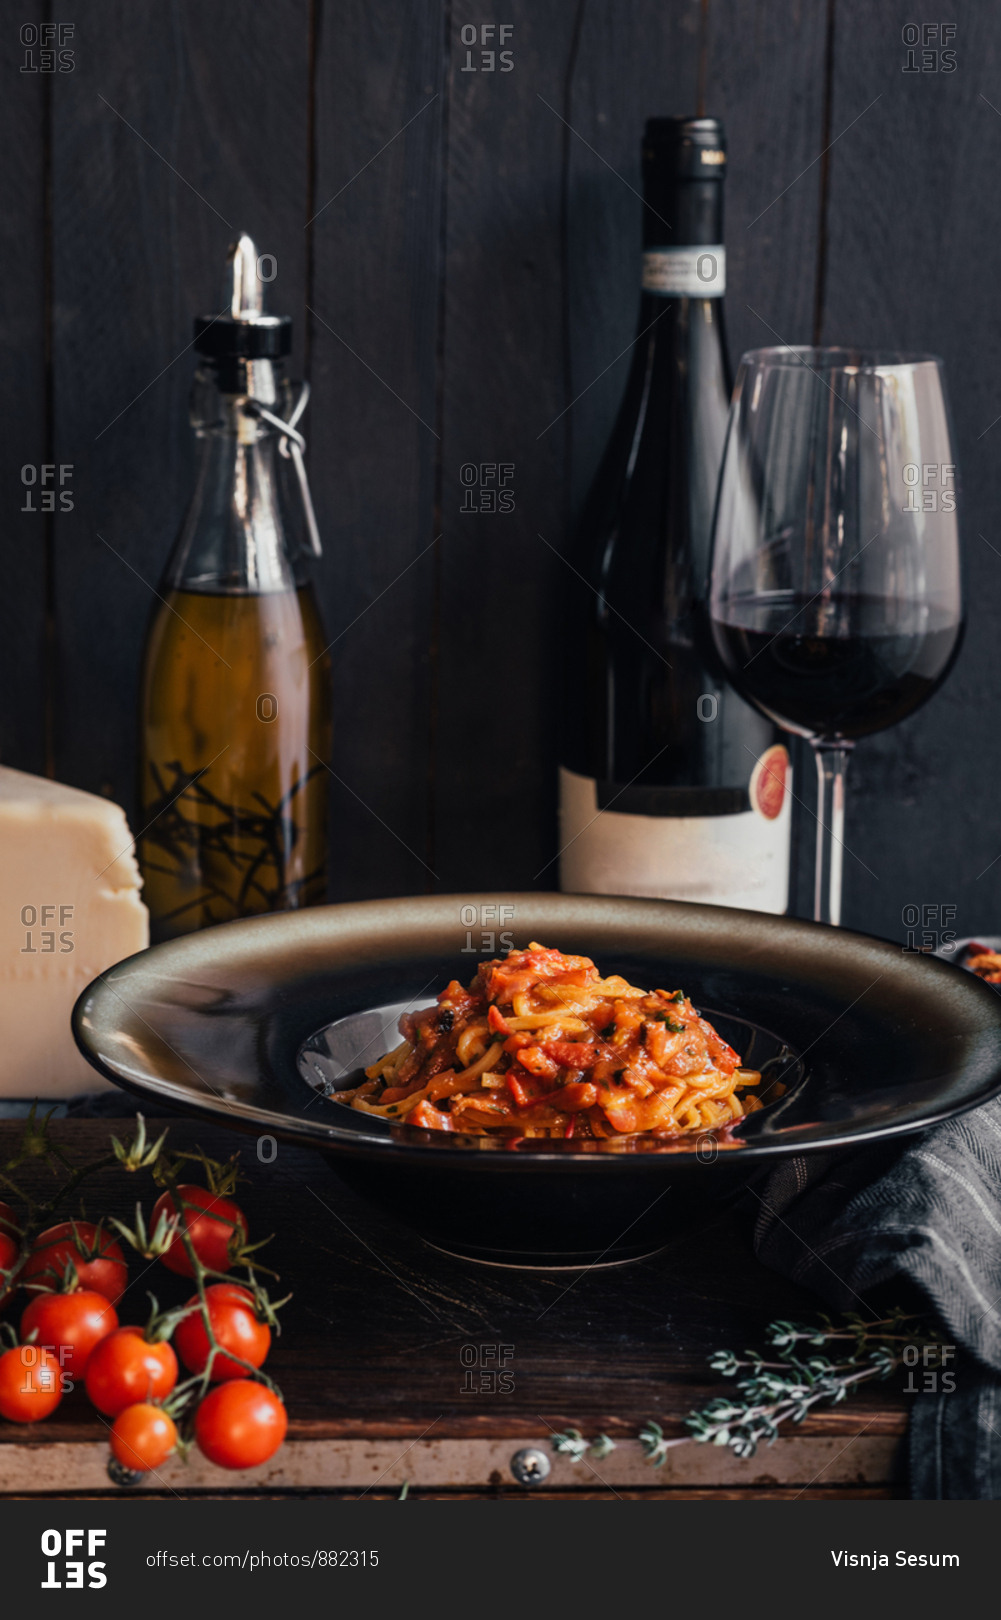 Homemade pasta with tomato sauce in a plate next to a bottle of red wine